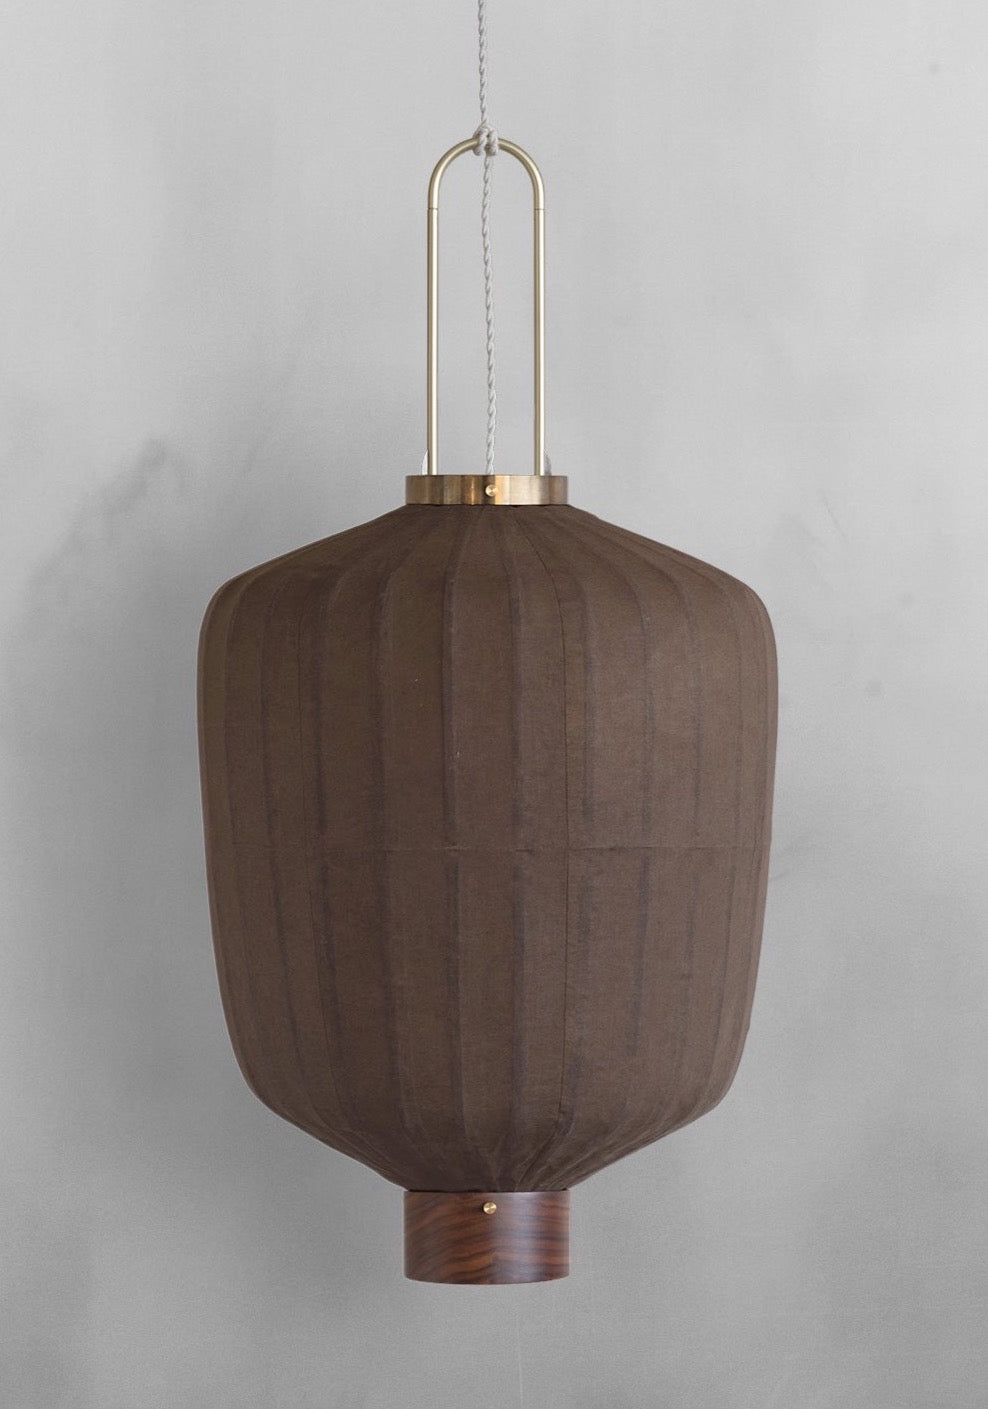 The Tuolo shape Plant Dyed Lantern Brown by Taiwan Lantern.